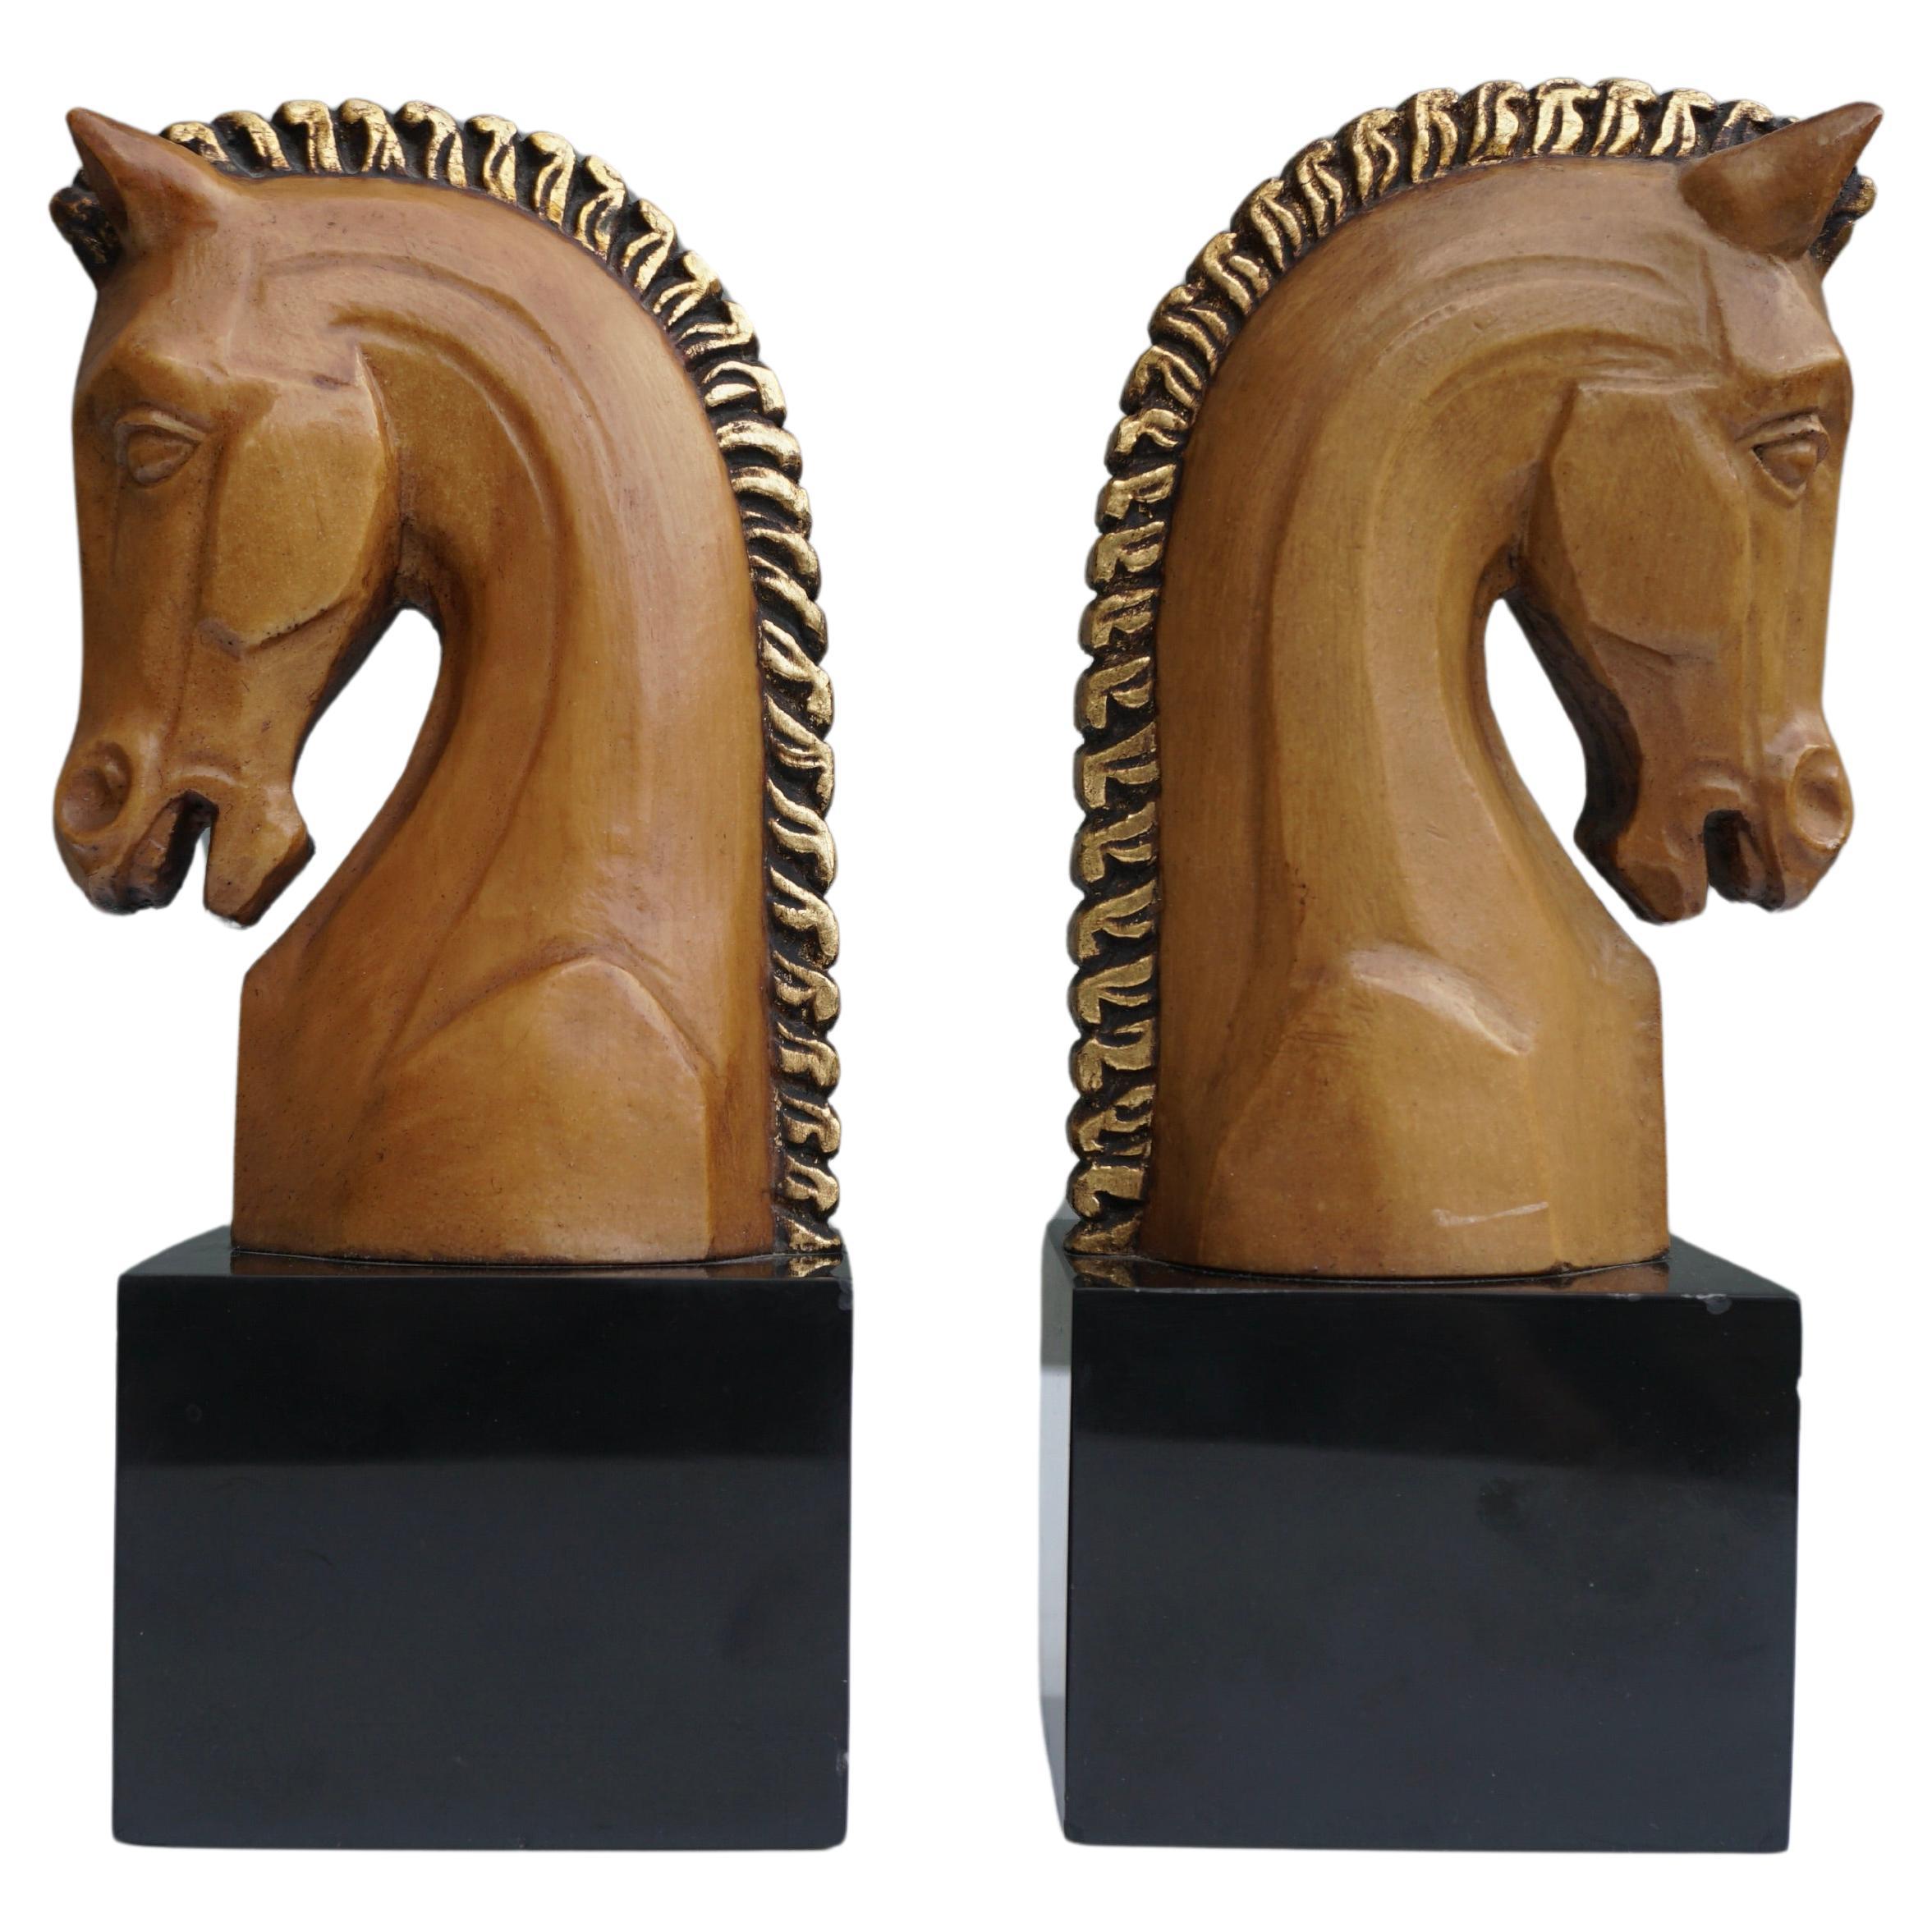 Pair of Midcentury Marble and Wooden Horse Head Bookends For Sale